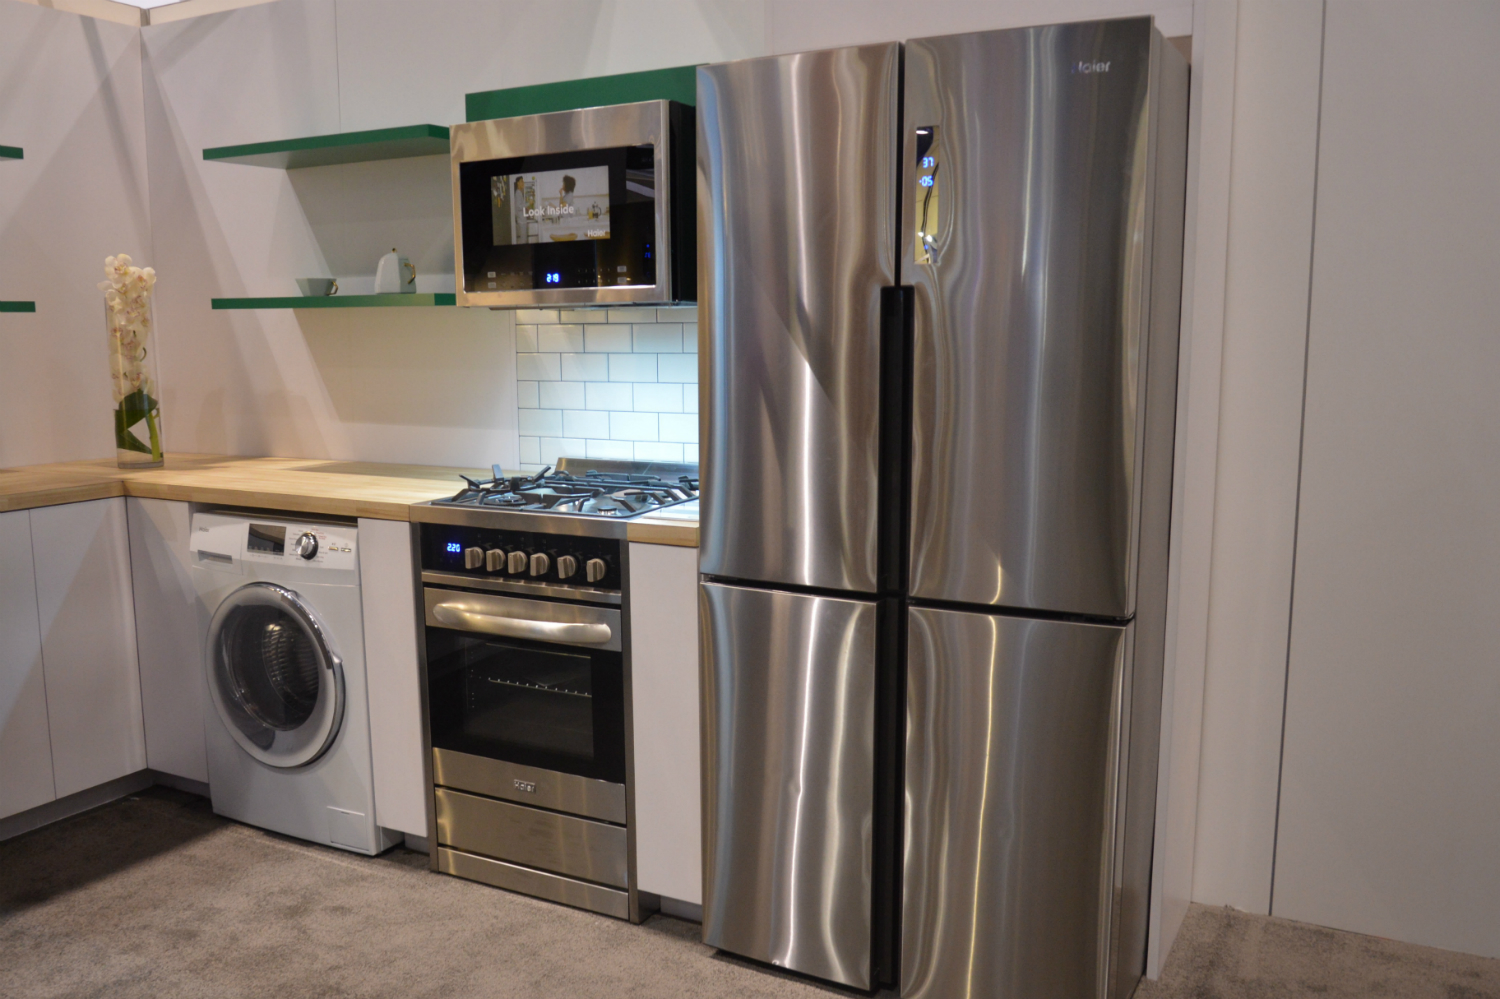 appliance trends kbis 2017 haier 24 inch washer dryer combo